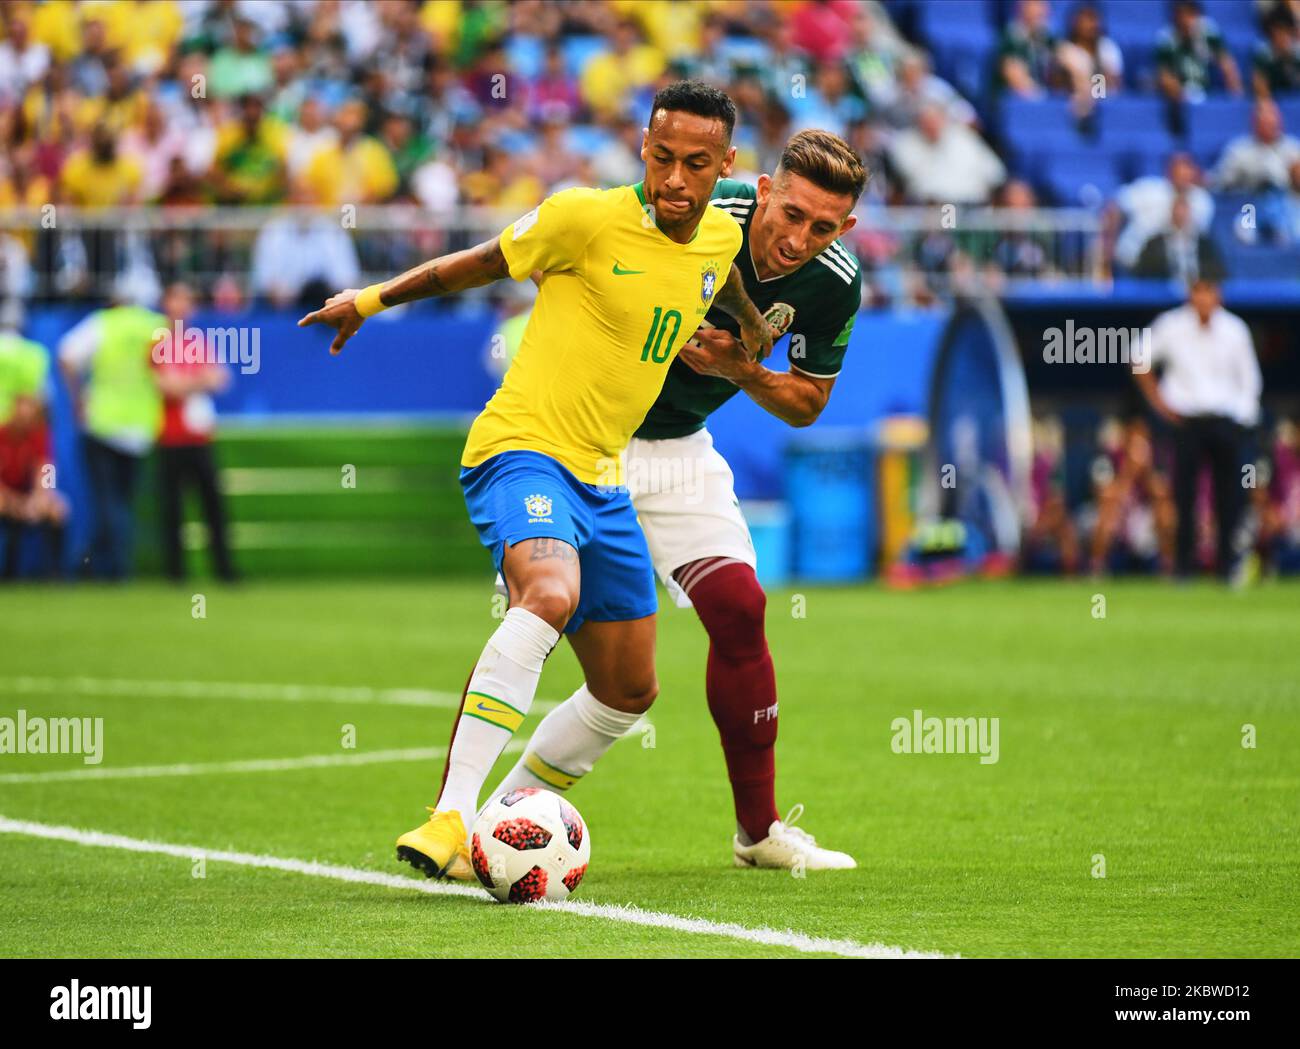 Neymar of Brazil dribbling in front of Hector Herrera of Mexico during the FIFA World Cup match Brazil versus Mexico at Samara Arena, Samara, Russia on July 2, 2018. (Photo by Ulrik Pedersen/NurPhoto) Stock Photo